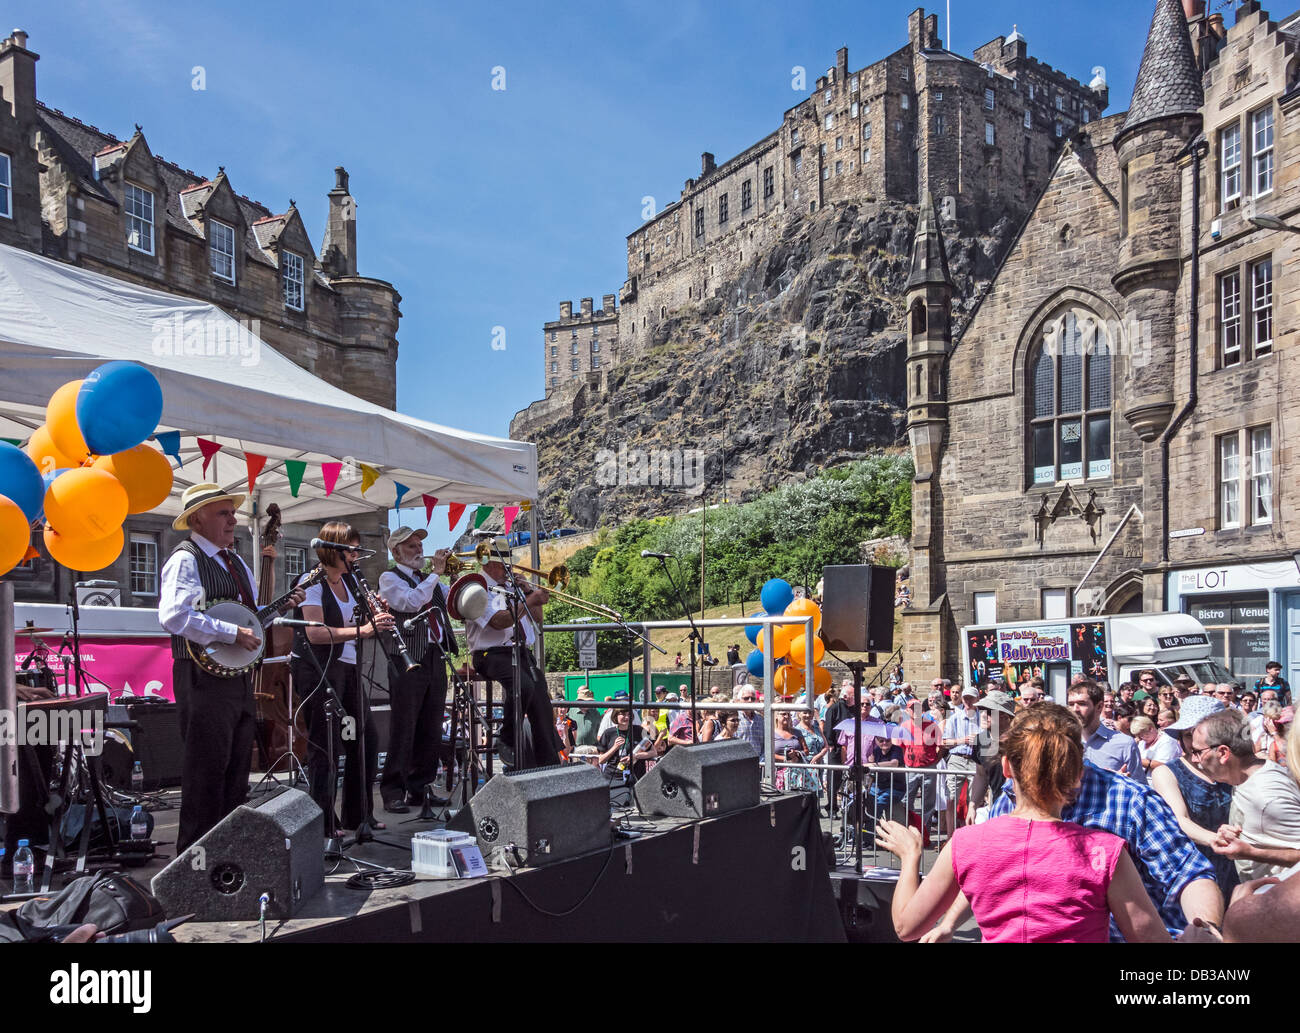 The Rae Brothers New Orleans Jazz Band playing at 2013 Edinburgh Jazz & Blues Festival in Grassmarket at the Mardi Gras event Stock Photo